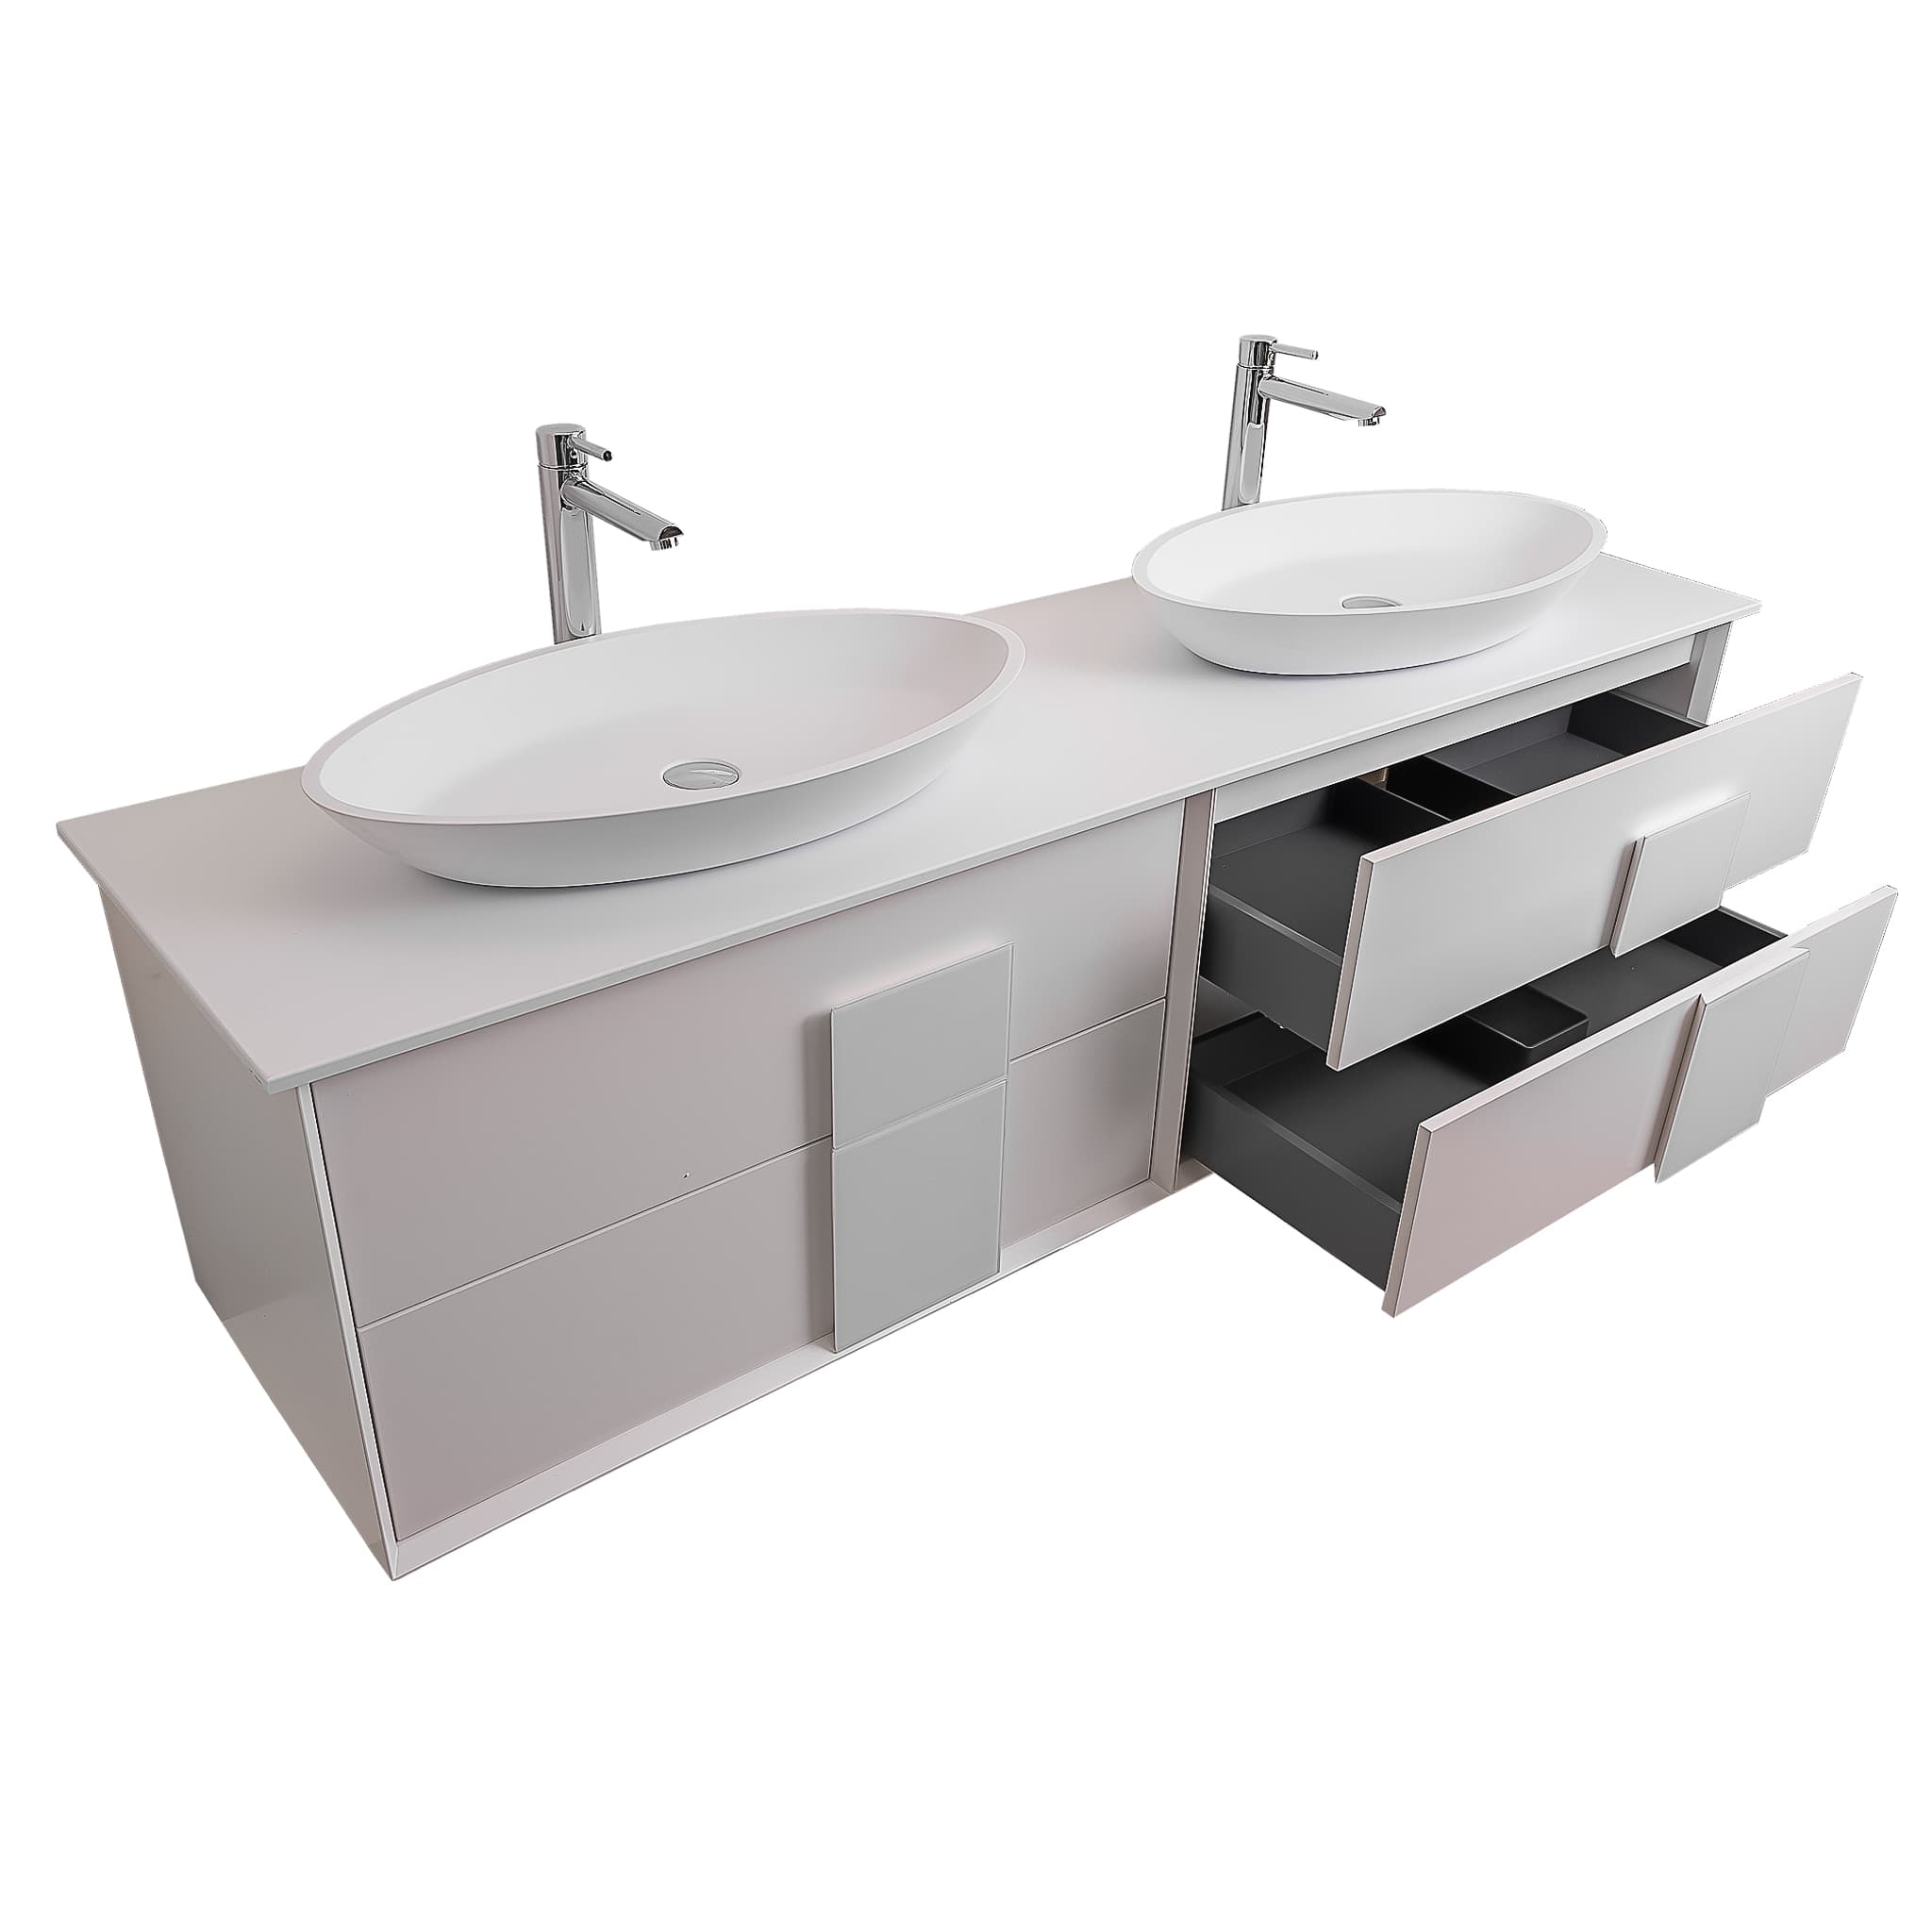 Piazza 63 Matte White With White Handle Cabinet, Solid Surface Flat White Counter and Two Oval Solid Surface White Basin 1305, Wall Mounted Modern Vanity Set